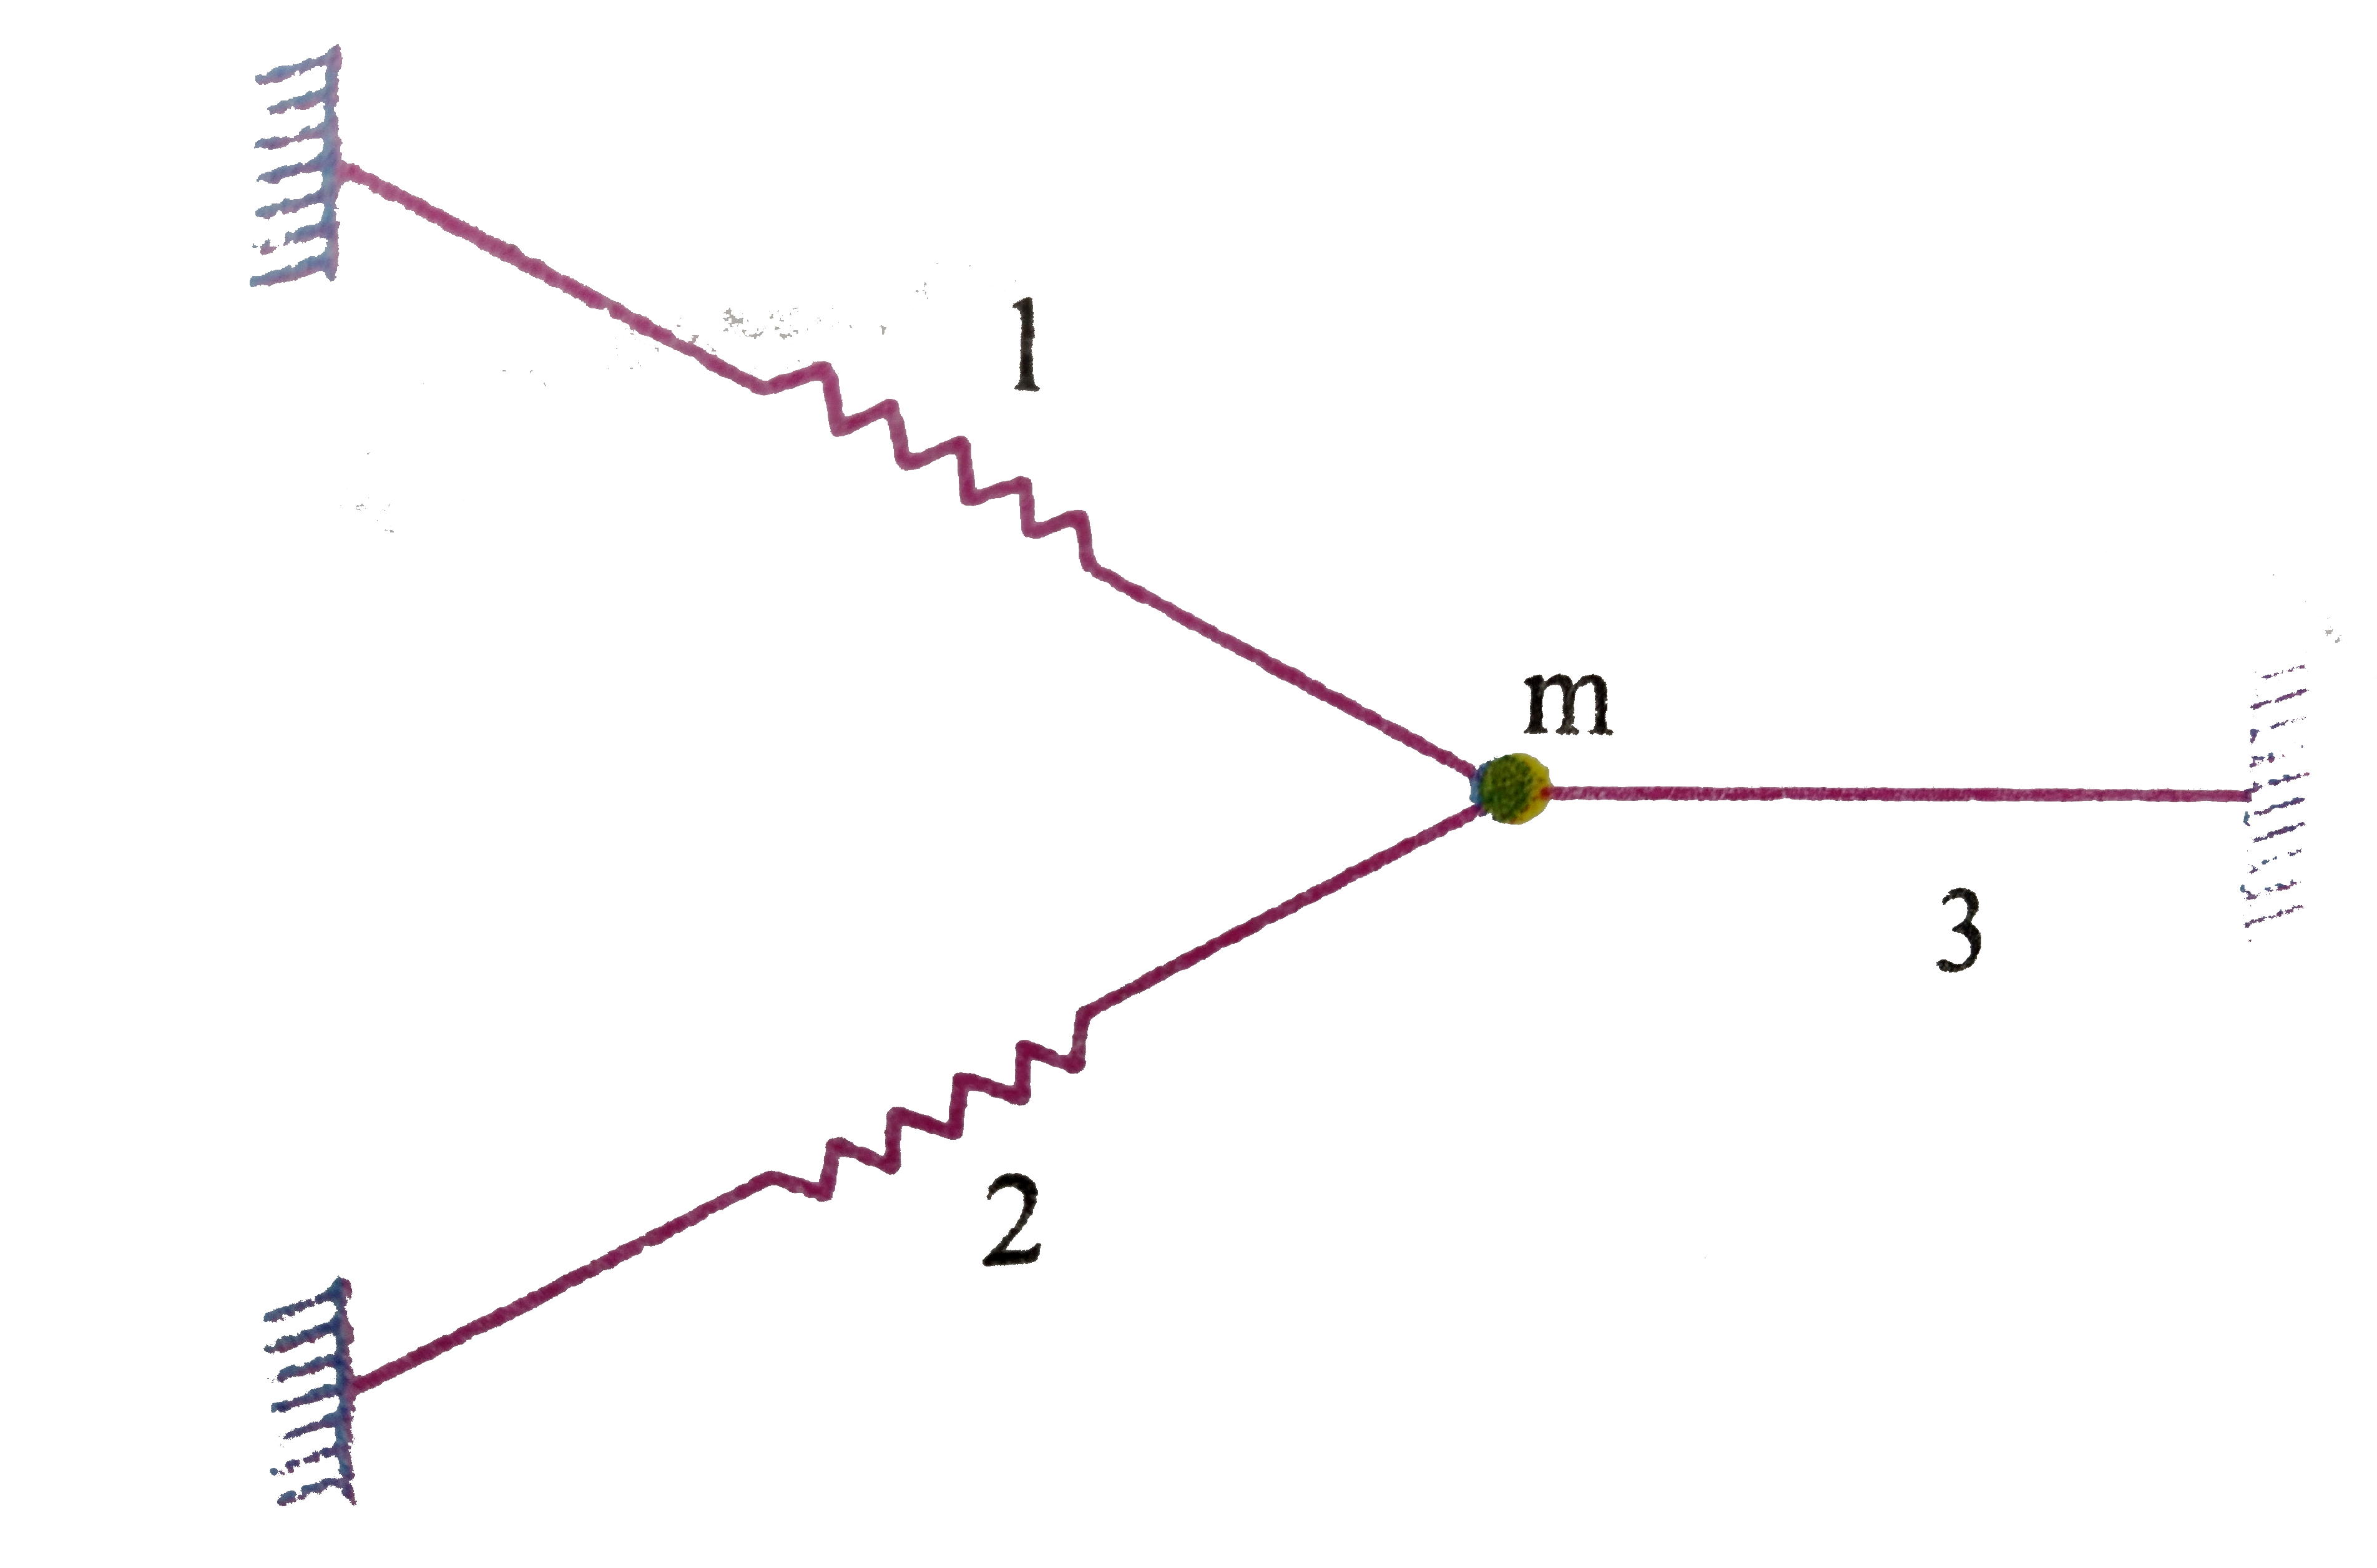 The system shown is lying on a smooth horizontal surface. Mass m is constrained to move along the line 3. Springs 1 and 2 at right angles with respect to one another are symmetrically arranges with respect to 3 which is an elastic cord. The force constants of 1,2 and 3are k each and they are all just taut in the condition shown. For small oscillations of m along 3, time period is pisqrt((m)/(yk)) (1+sqrt(x)). The valye of xy is